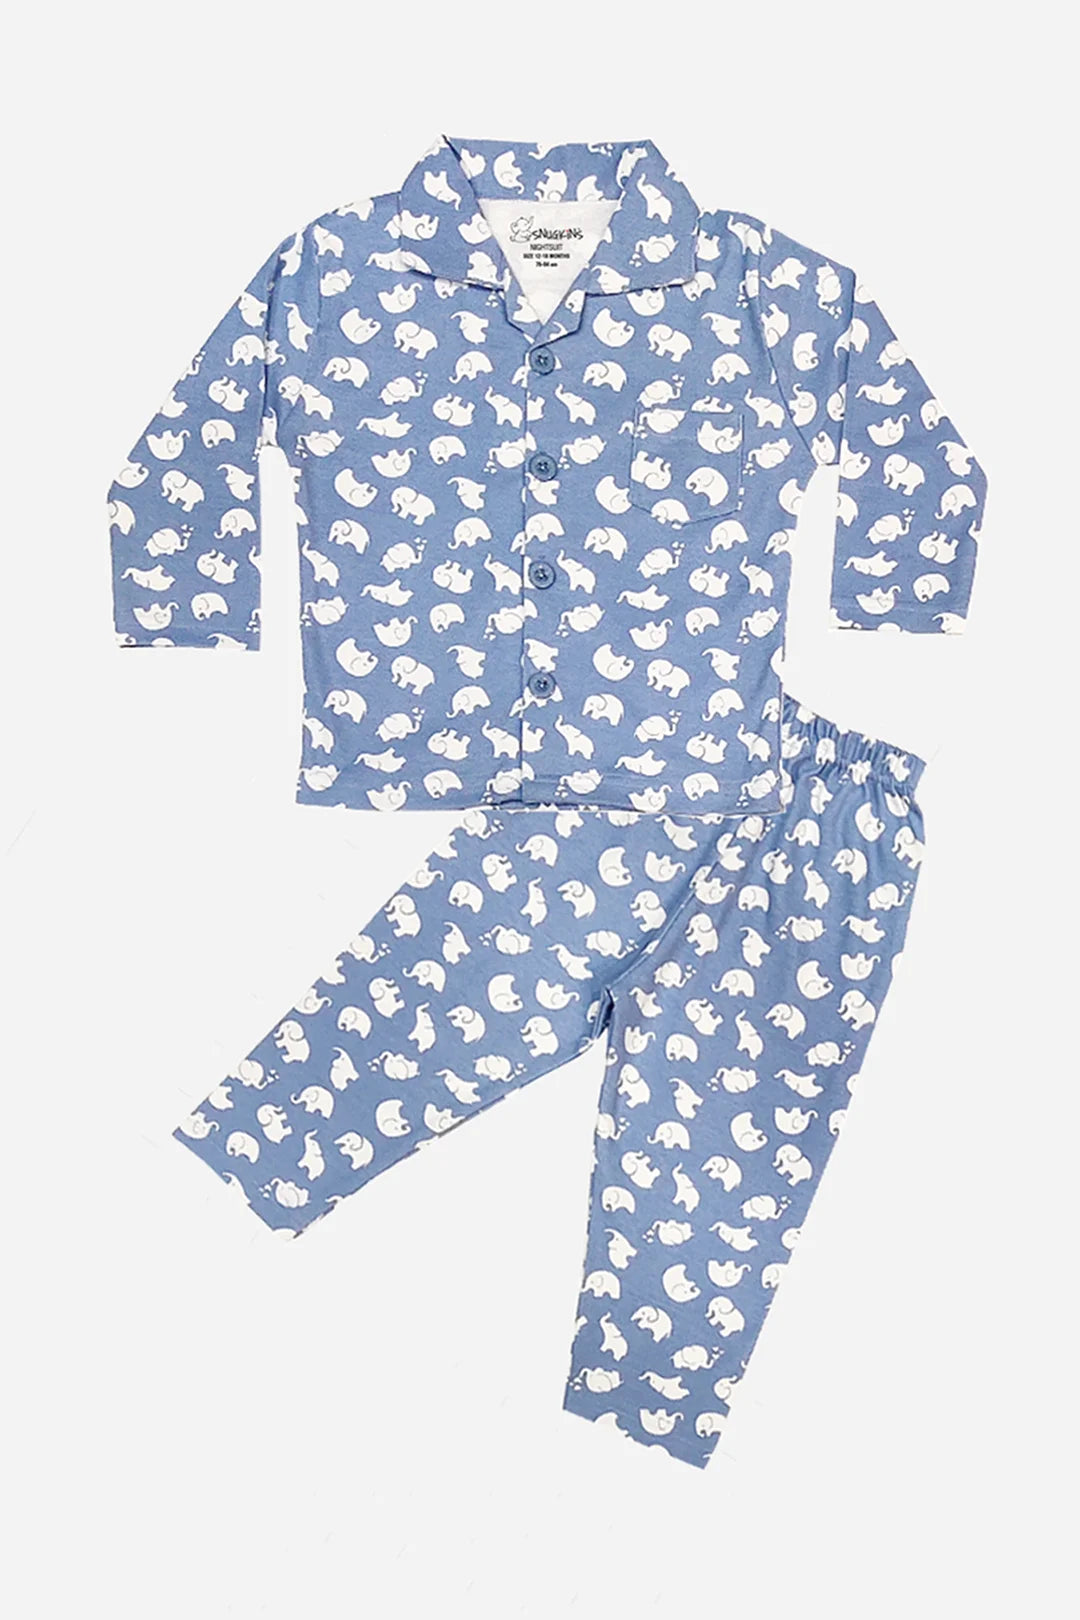 Sky Blue Octopus Pajamas for Babies baby care baby dress kids dress kids wear baby wear